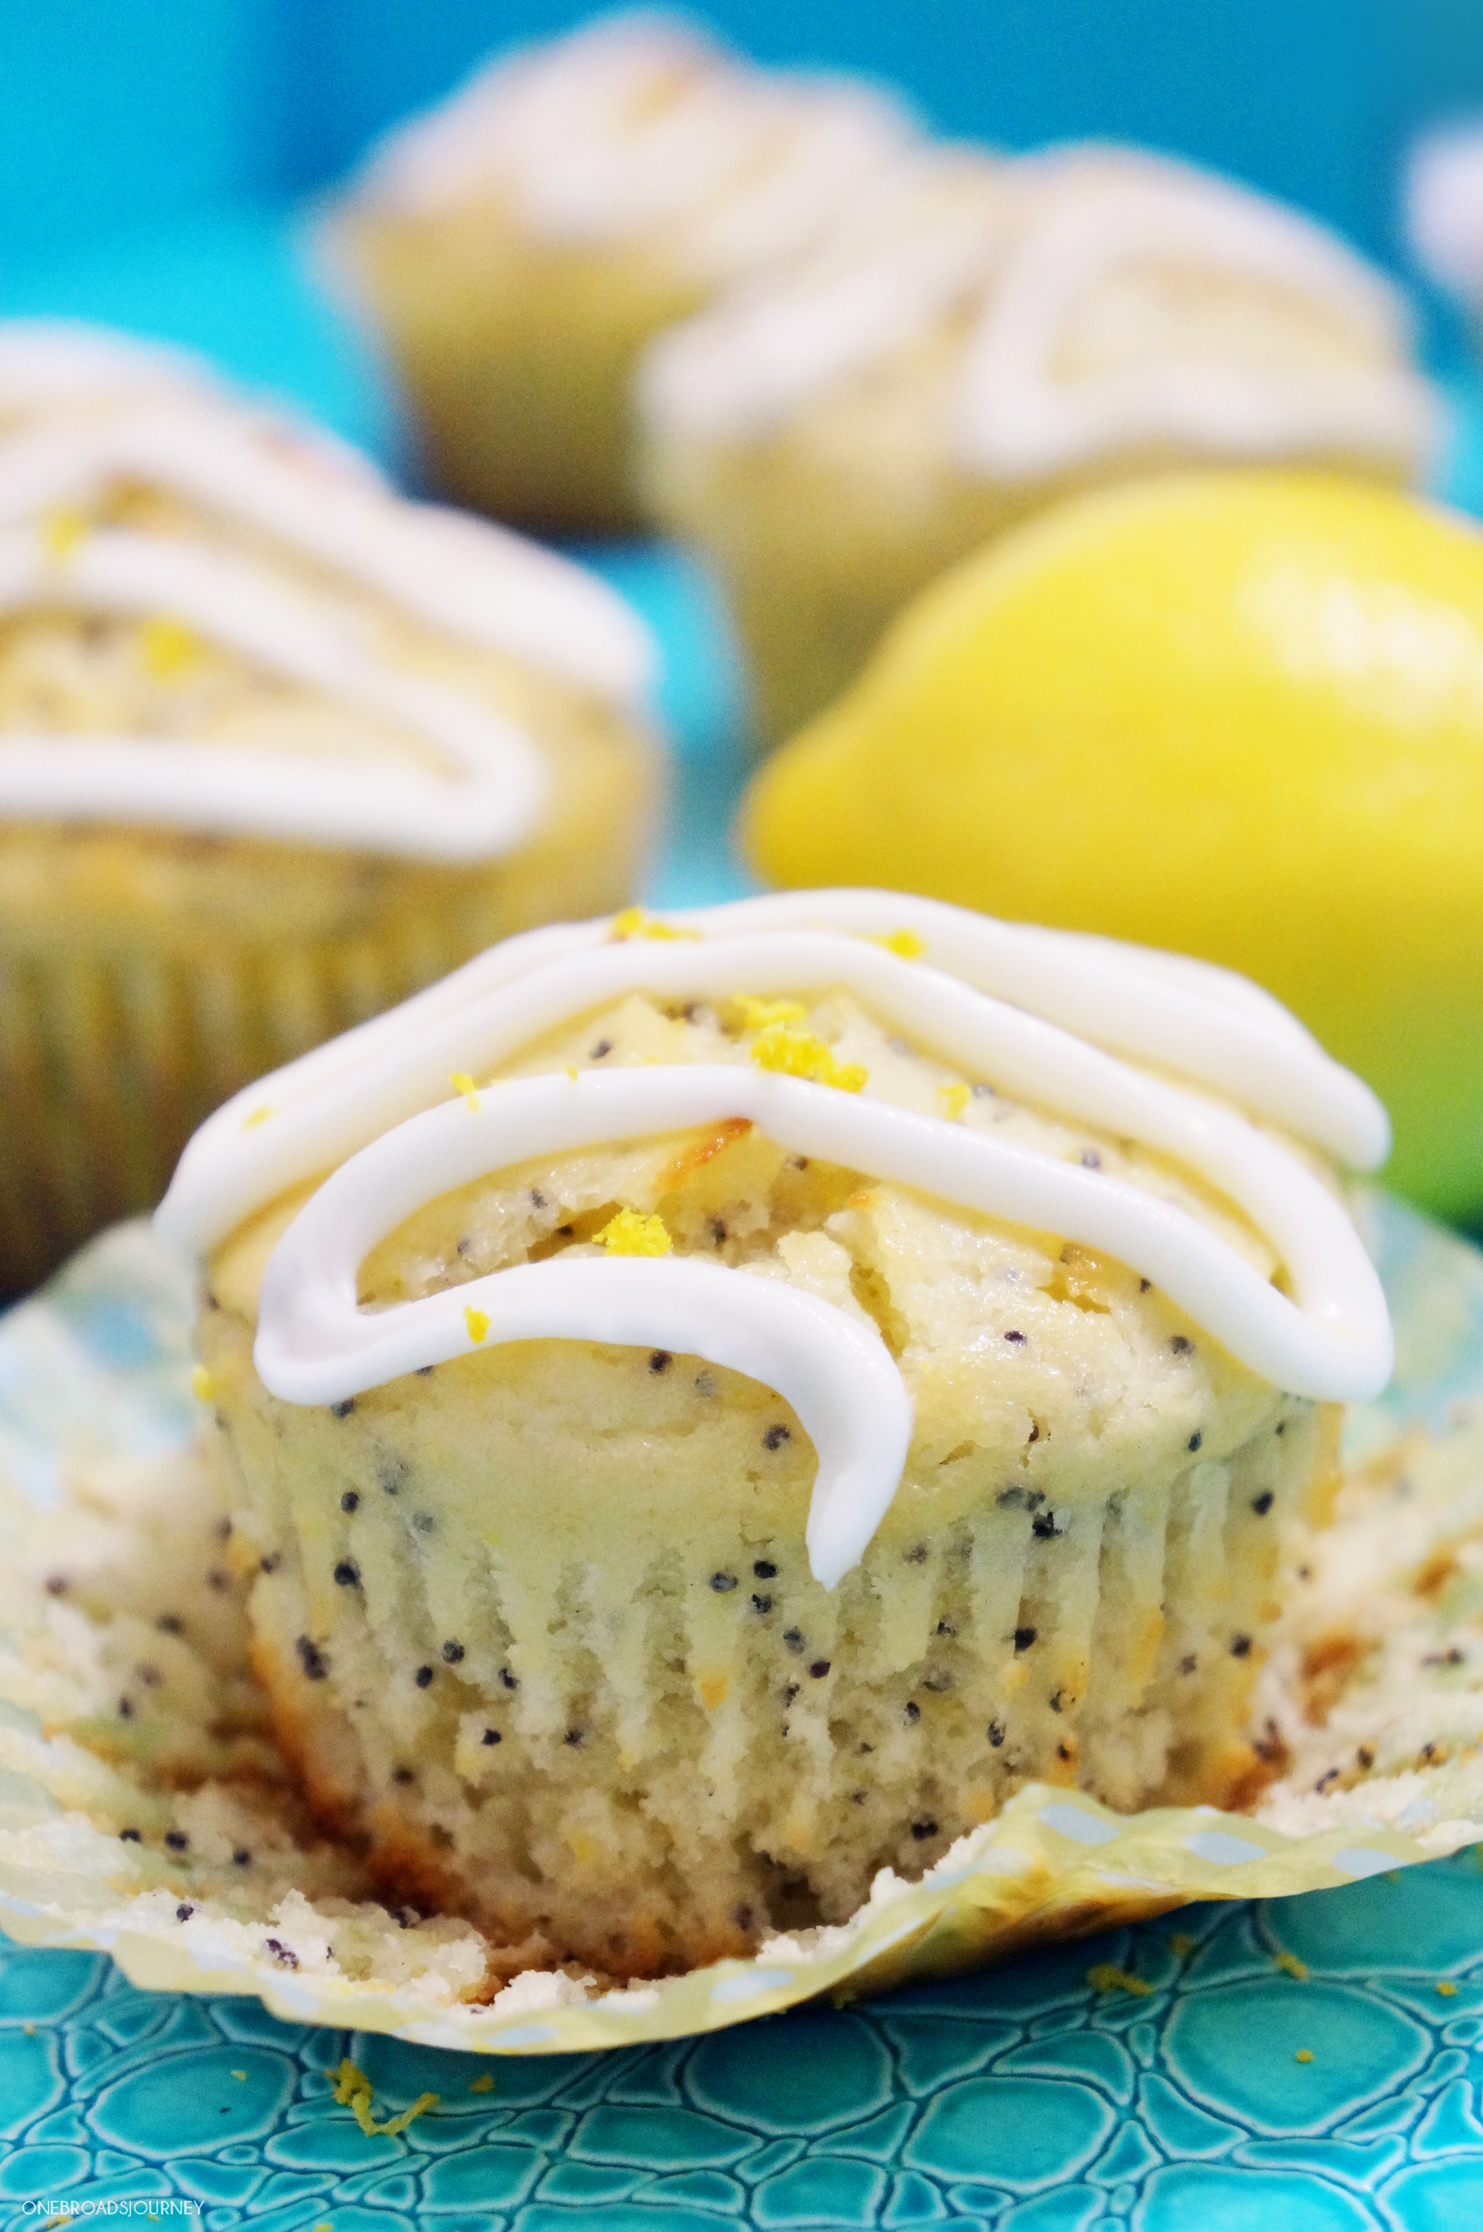 Lemon Poppyseed Muffins with Cream Cheese Frosting